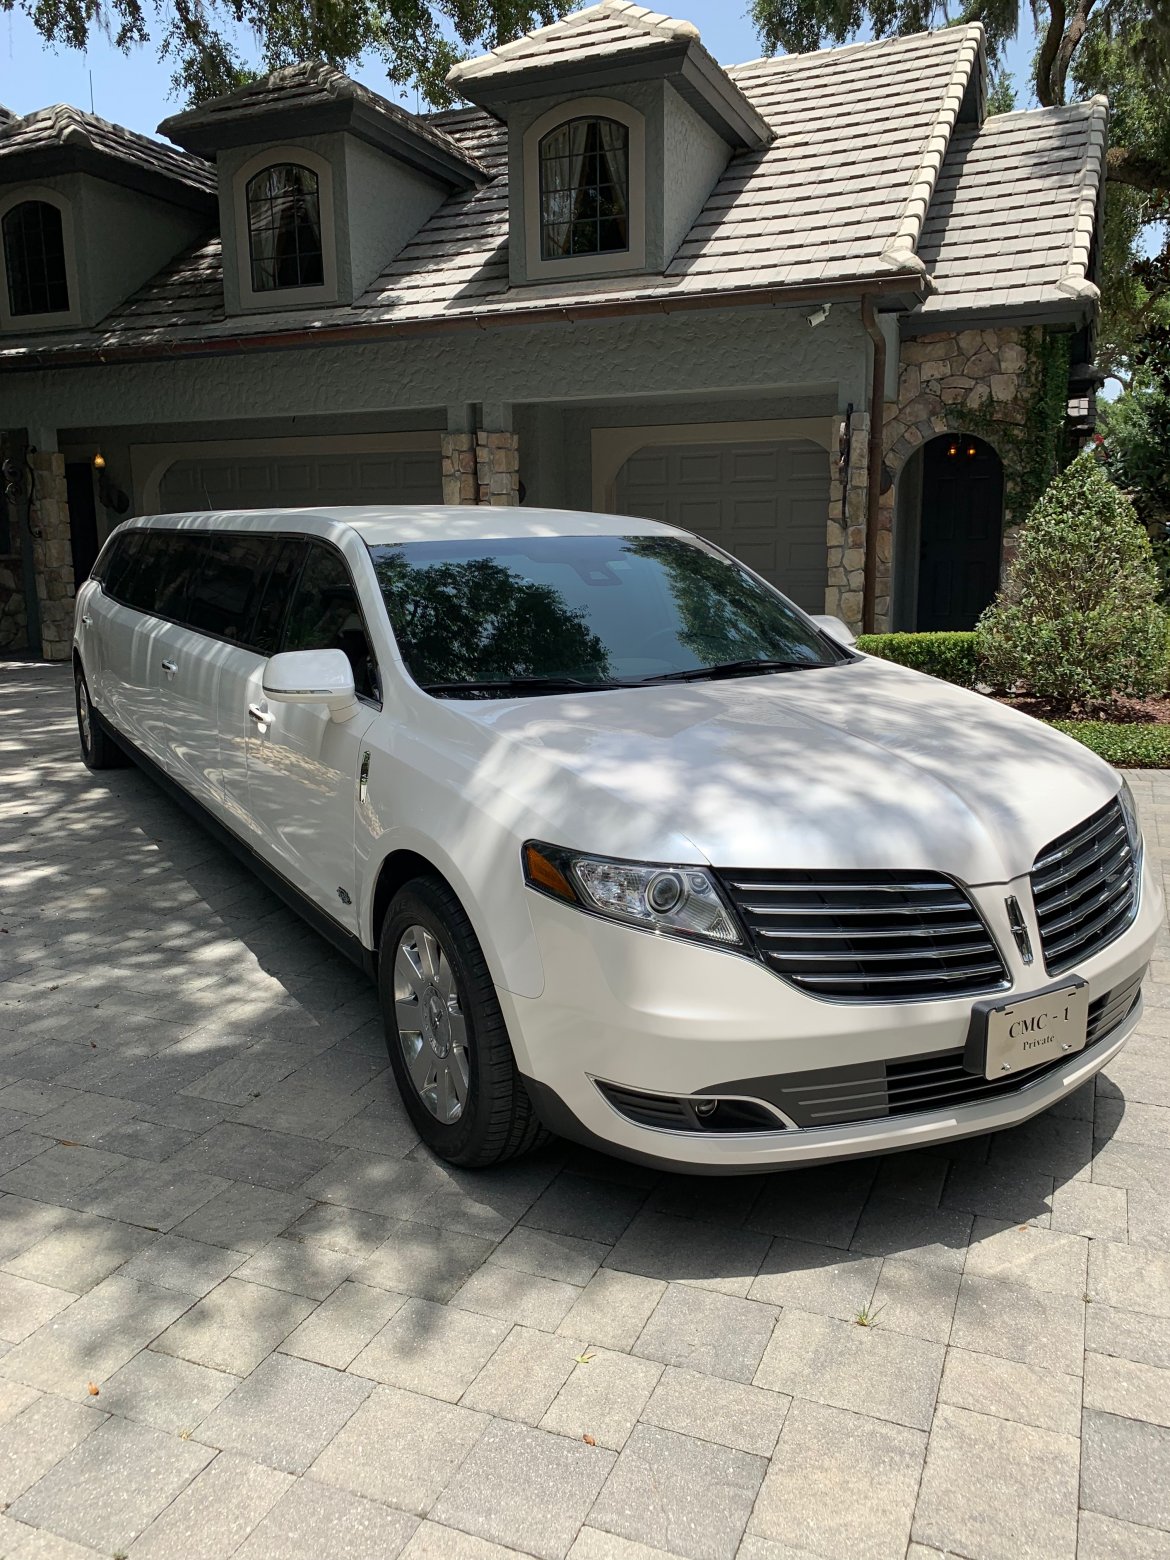 Limousine for sale: 2017 Lincoln mkt 120&quot; by royale